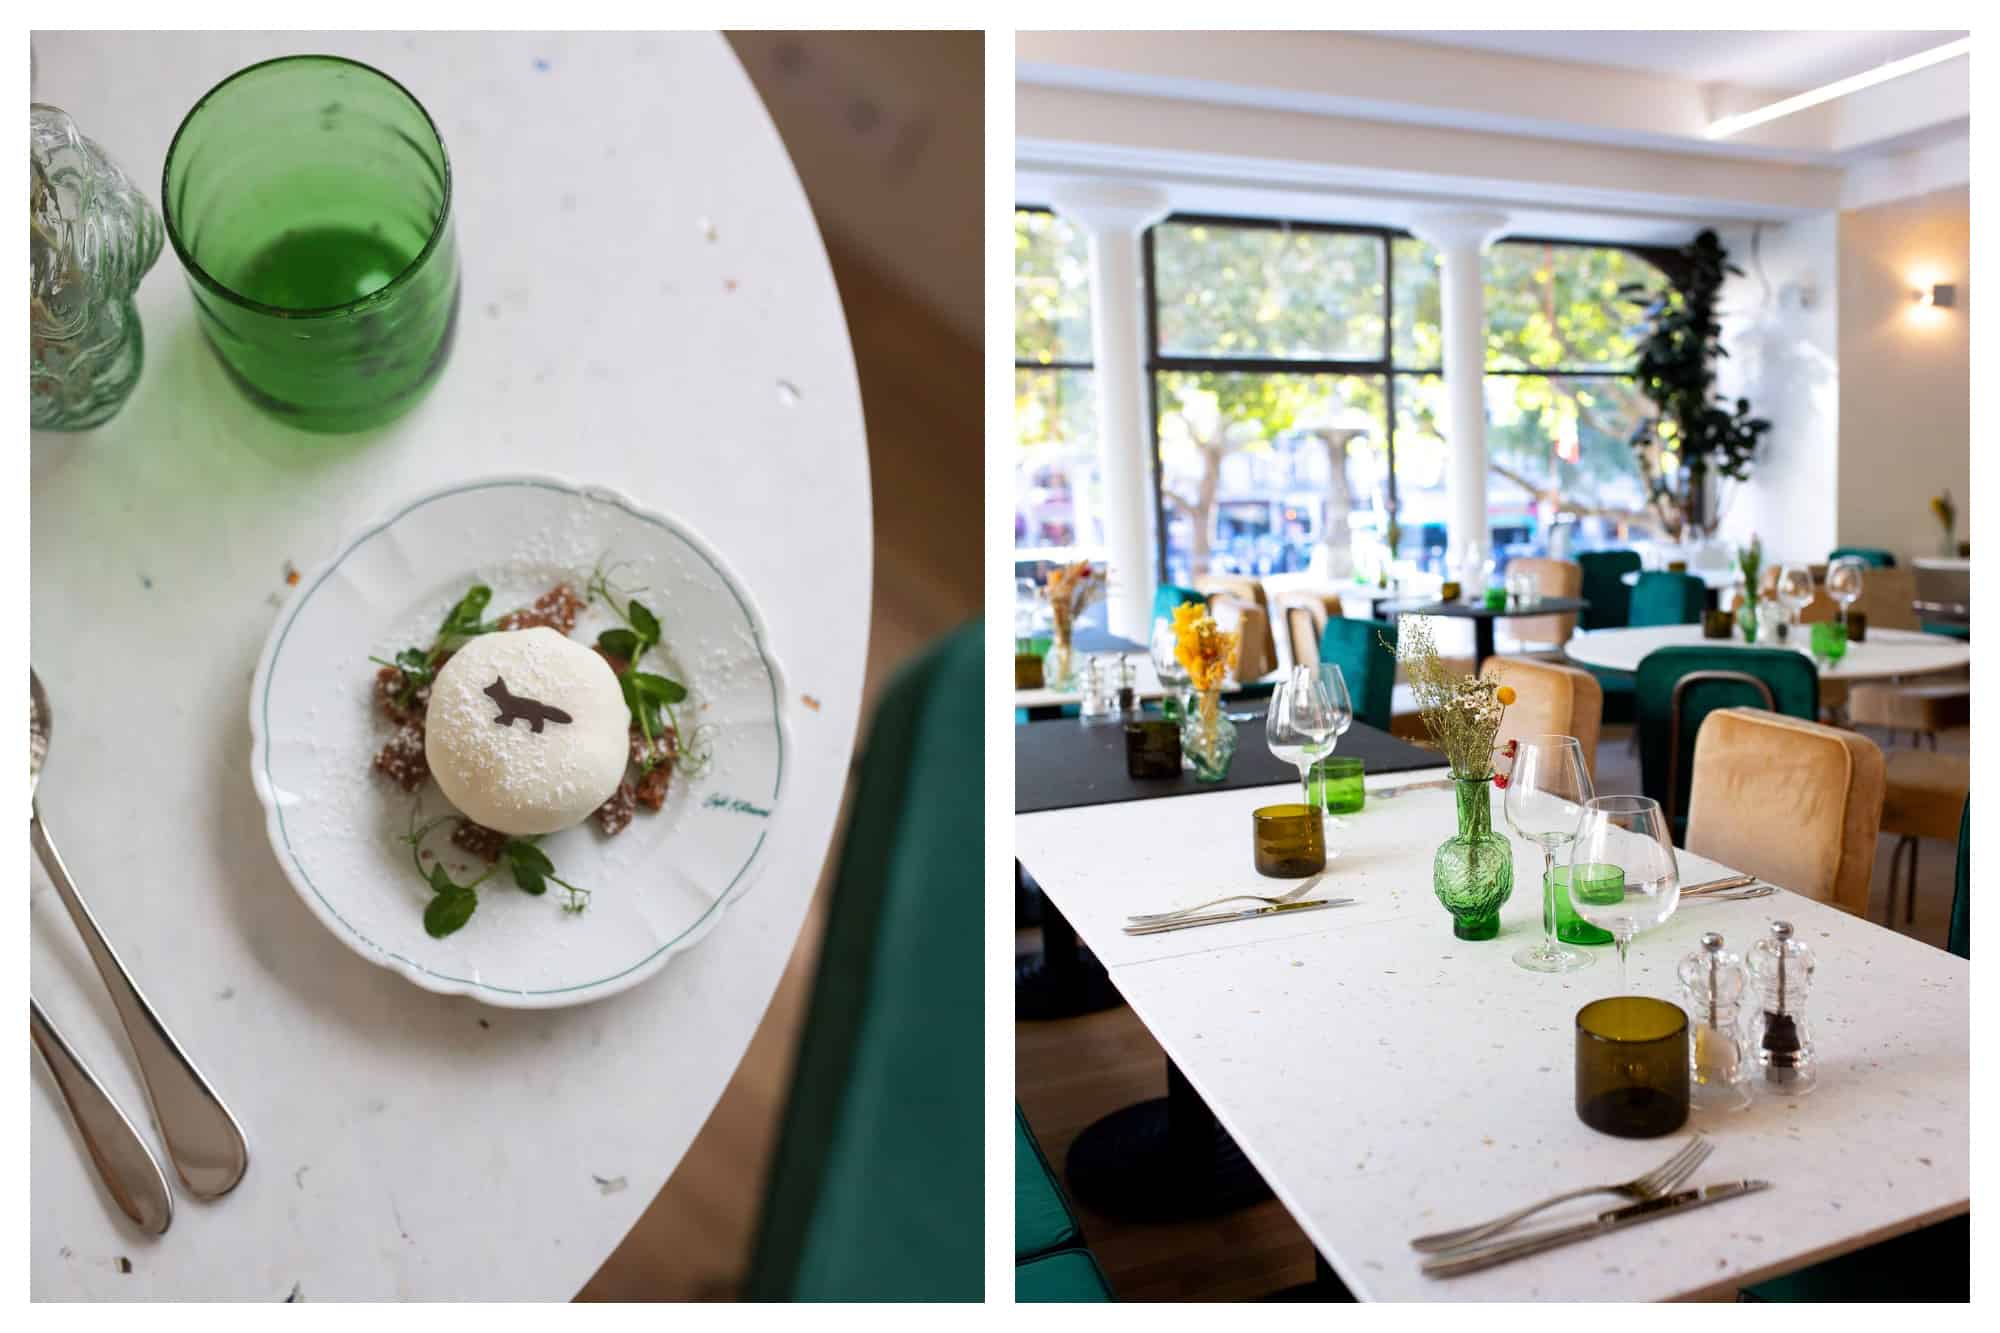 A rice ball dish with a small design of a fox on a table (left) and light and bright interiors (right) of Café Kitsuné in Paris.